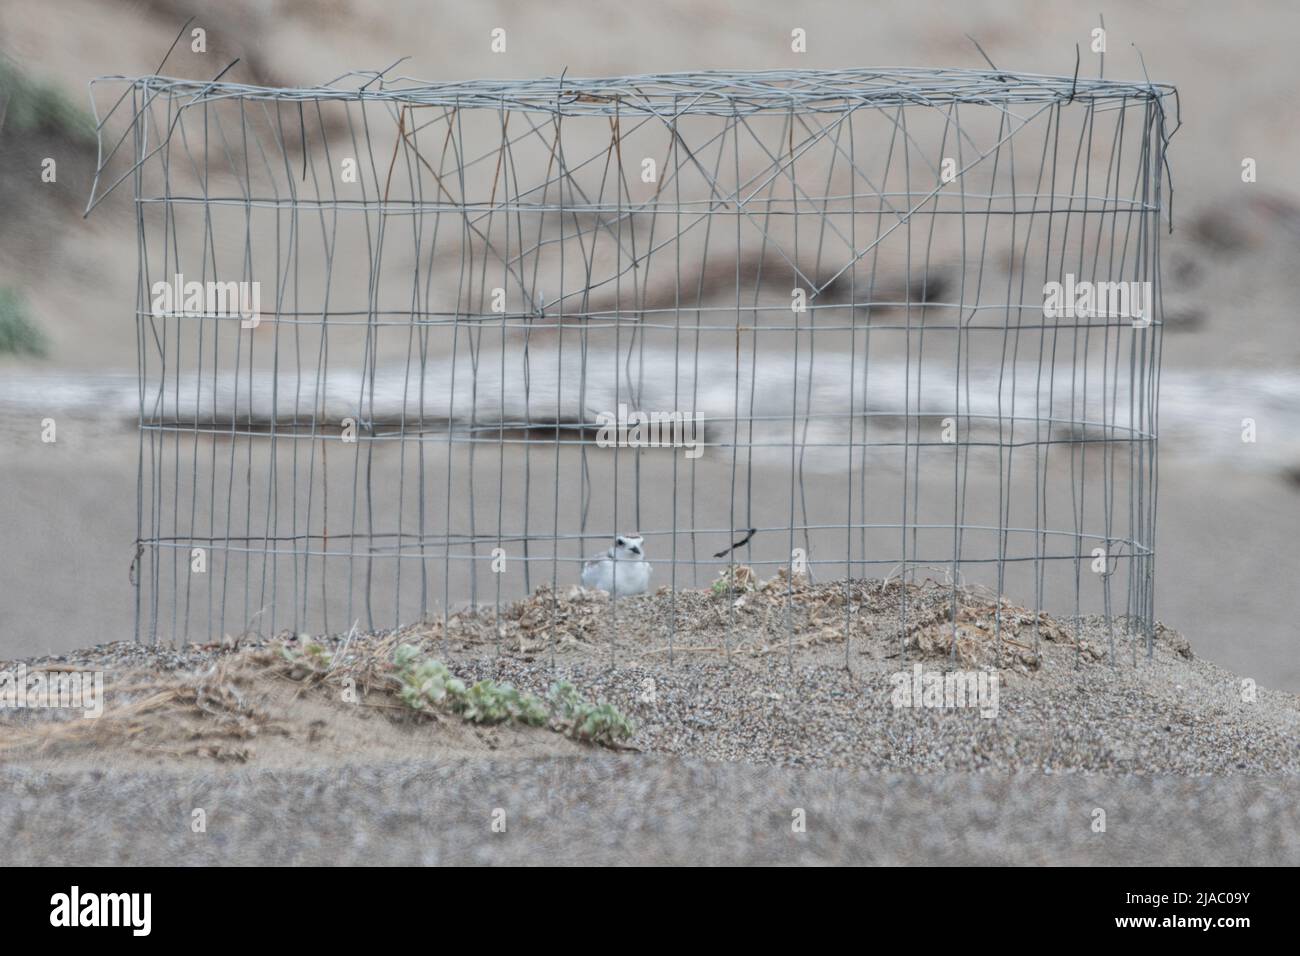 A nesting western snowy plover (Charadrius nivosus) encircled by a wire nest exclusion fence which keeps predators away from the eggs. Stock Photo